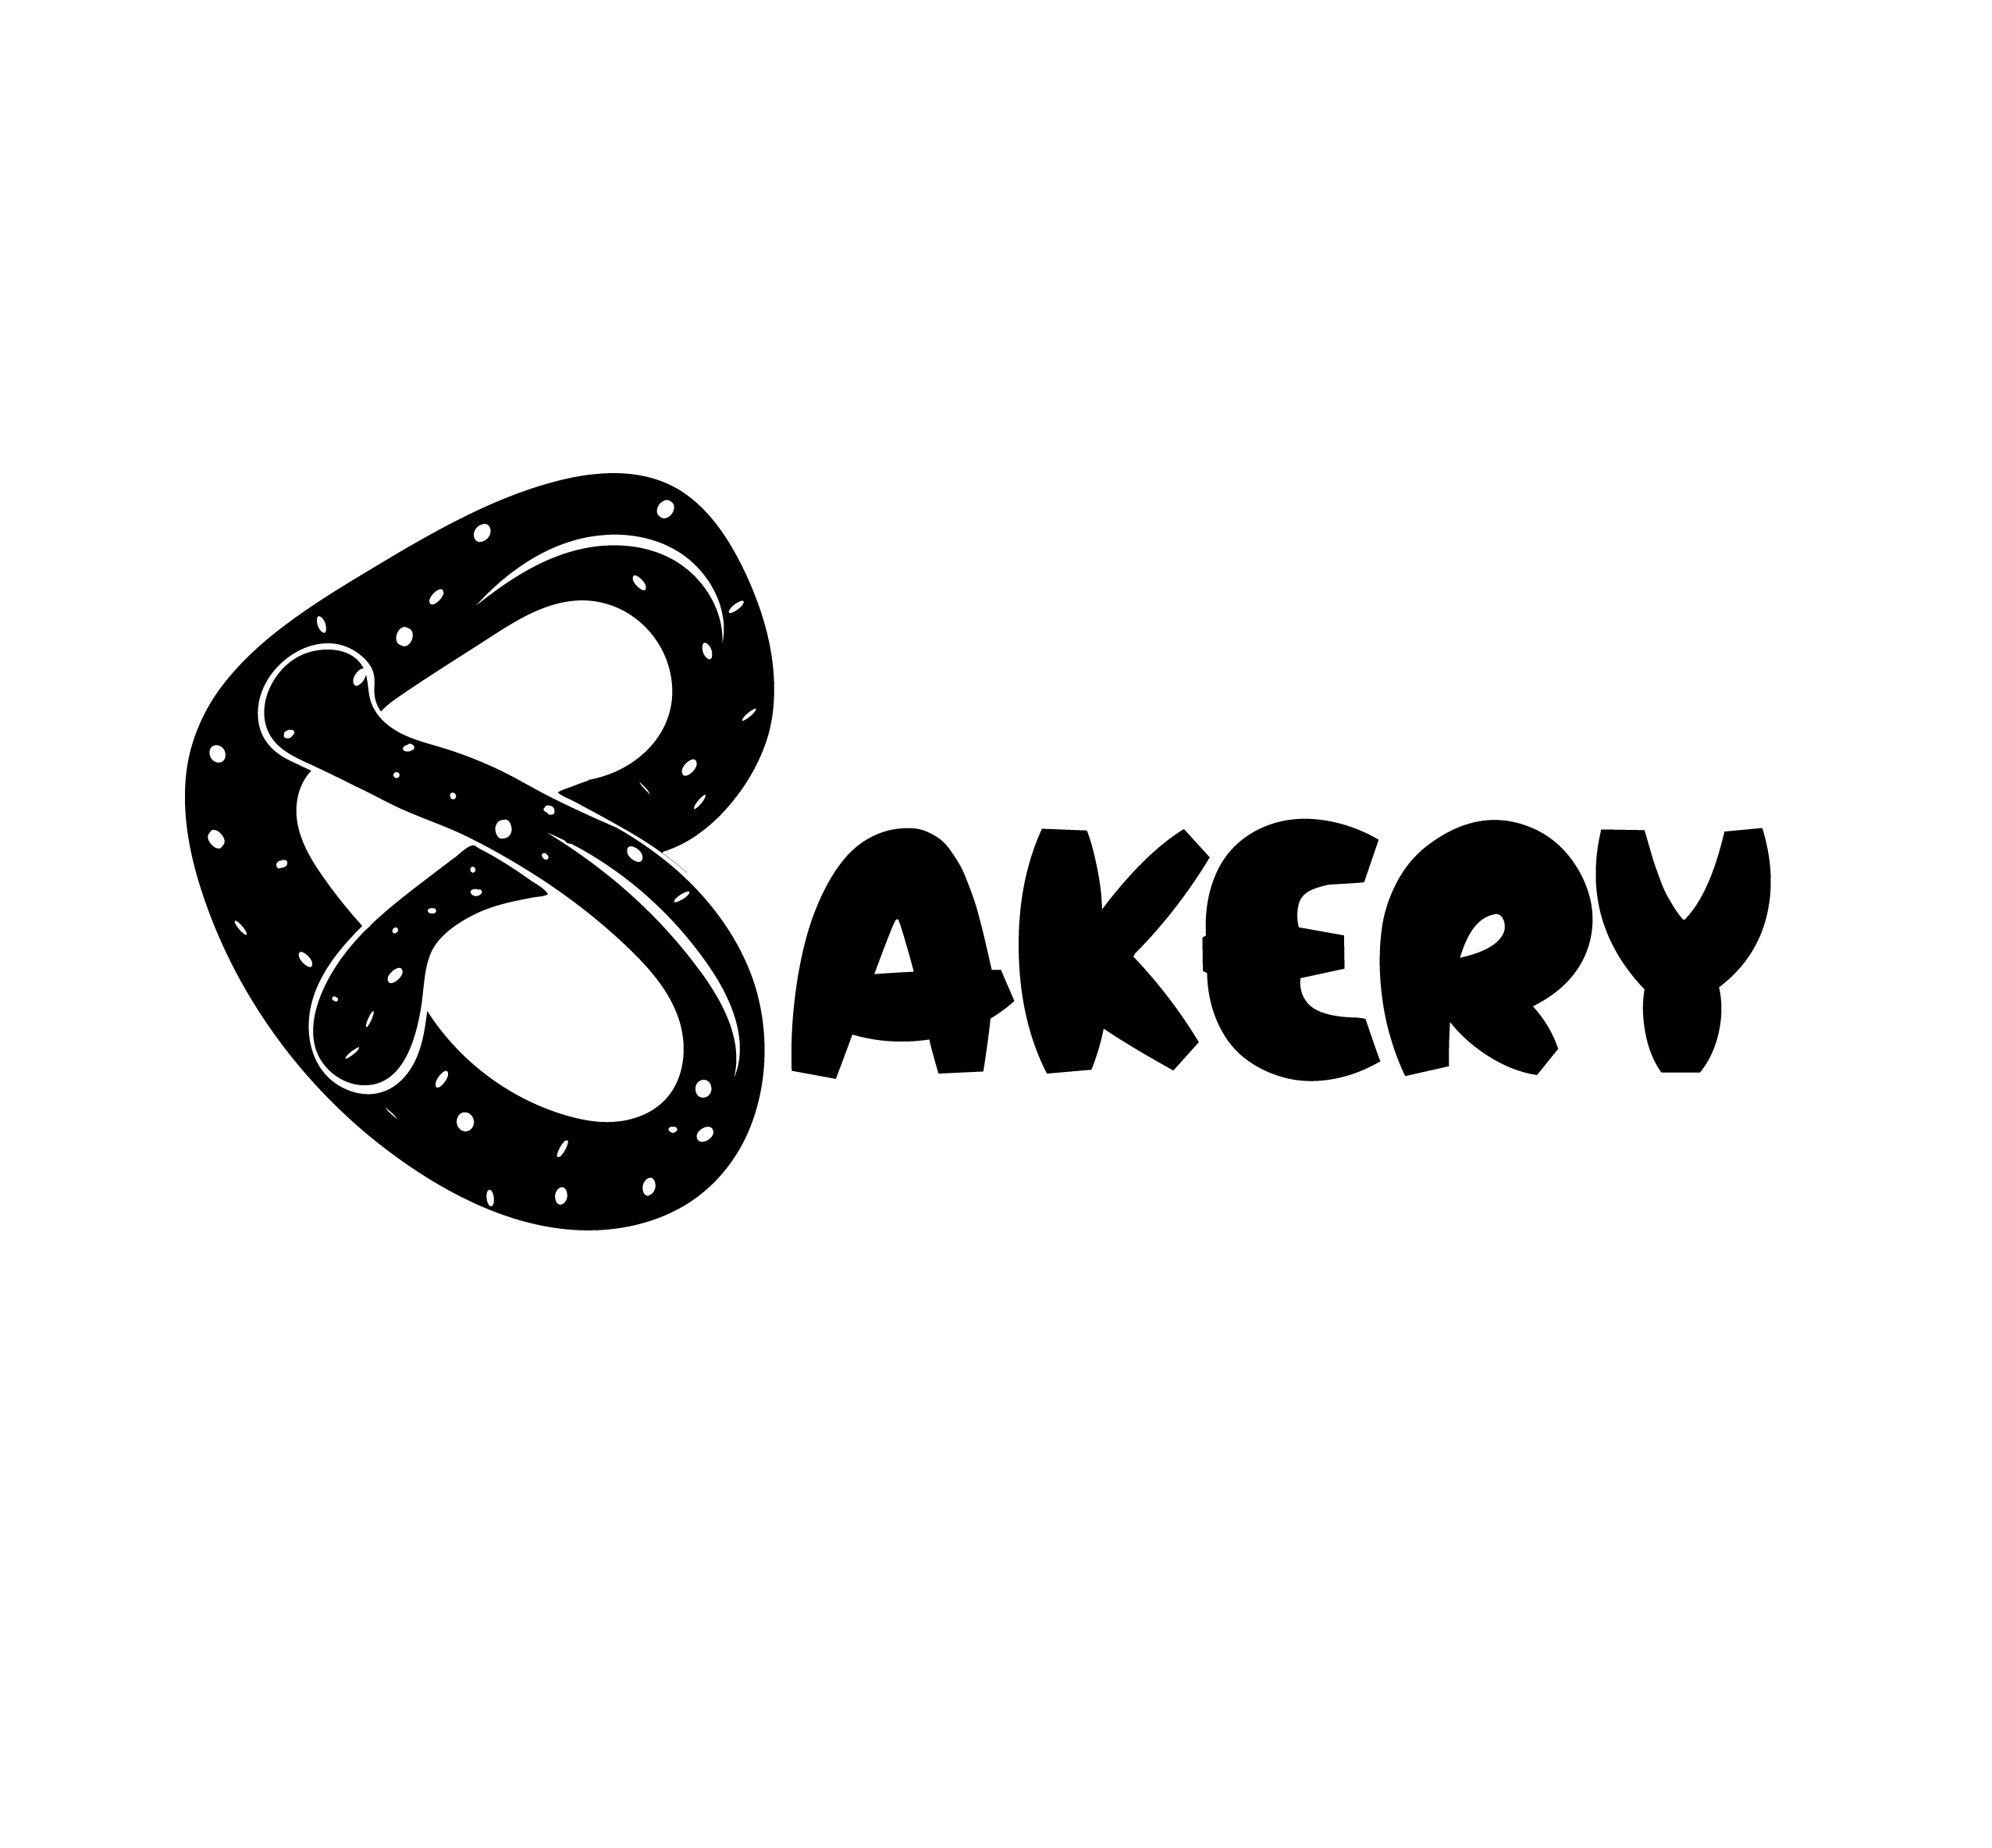 bakery logo png Bakery Outline Icons.